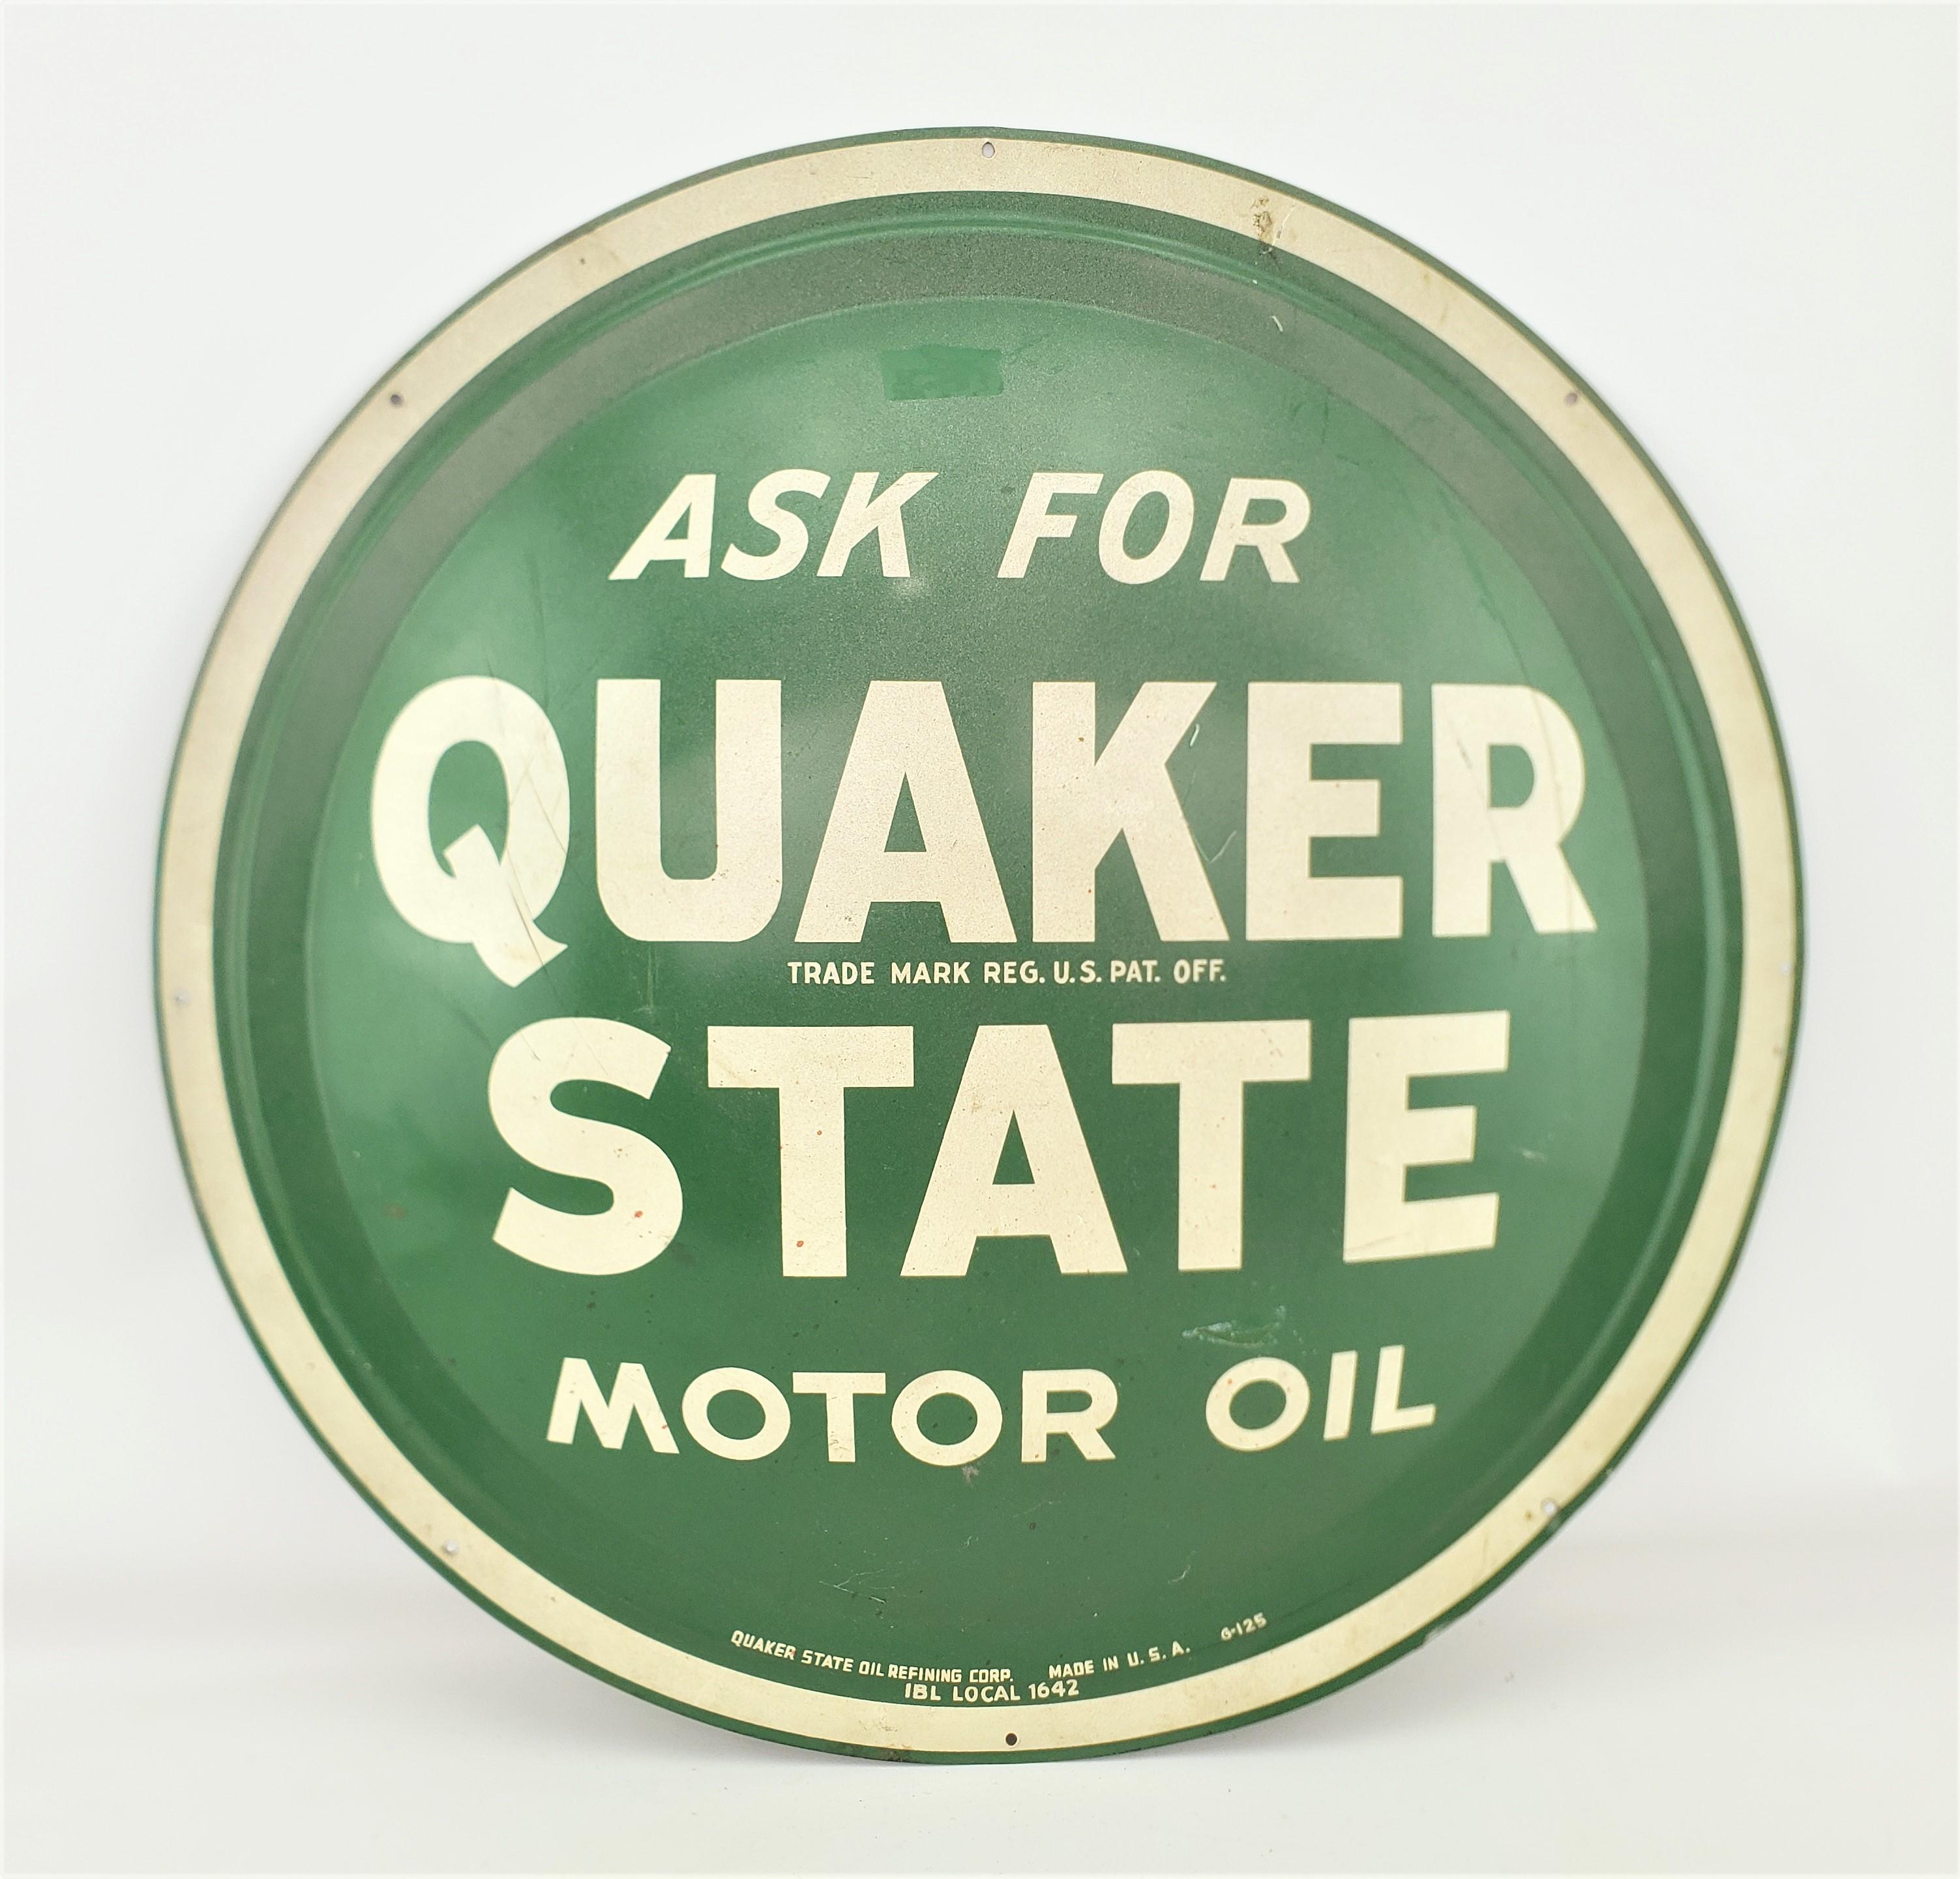 This vintage gas station advertising sign was made by the Quaker State Oil Company of the United States in approximately 1965 and done in the period Mid-Century Modern style. The sign is composed of pressed steel with the company hunter green